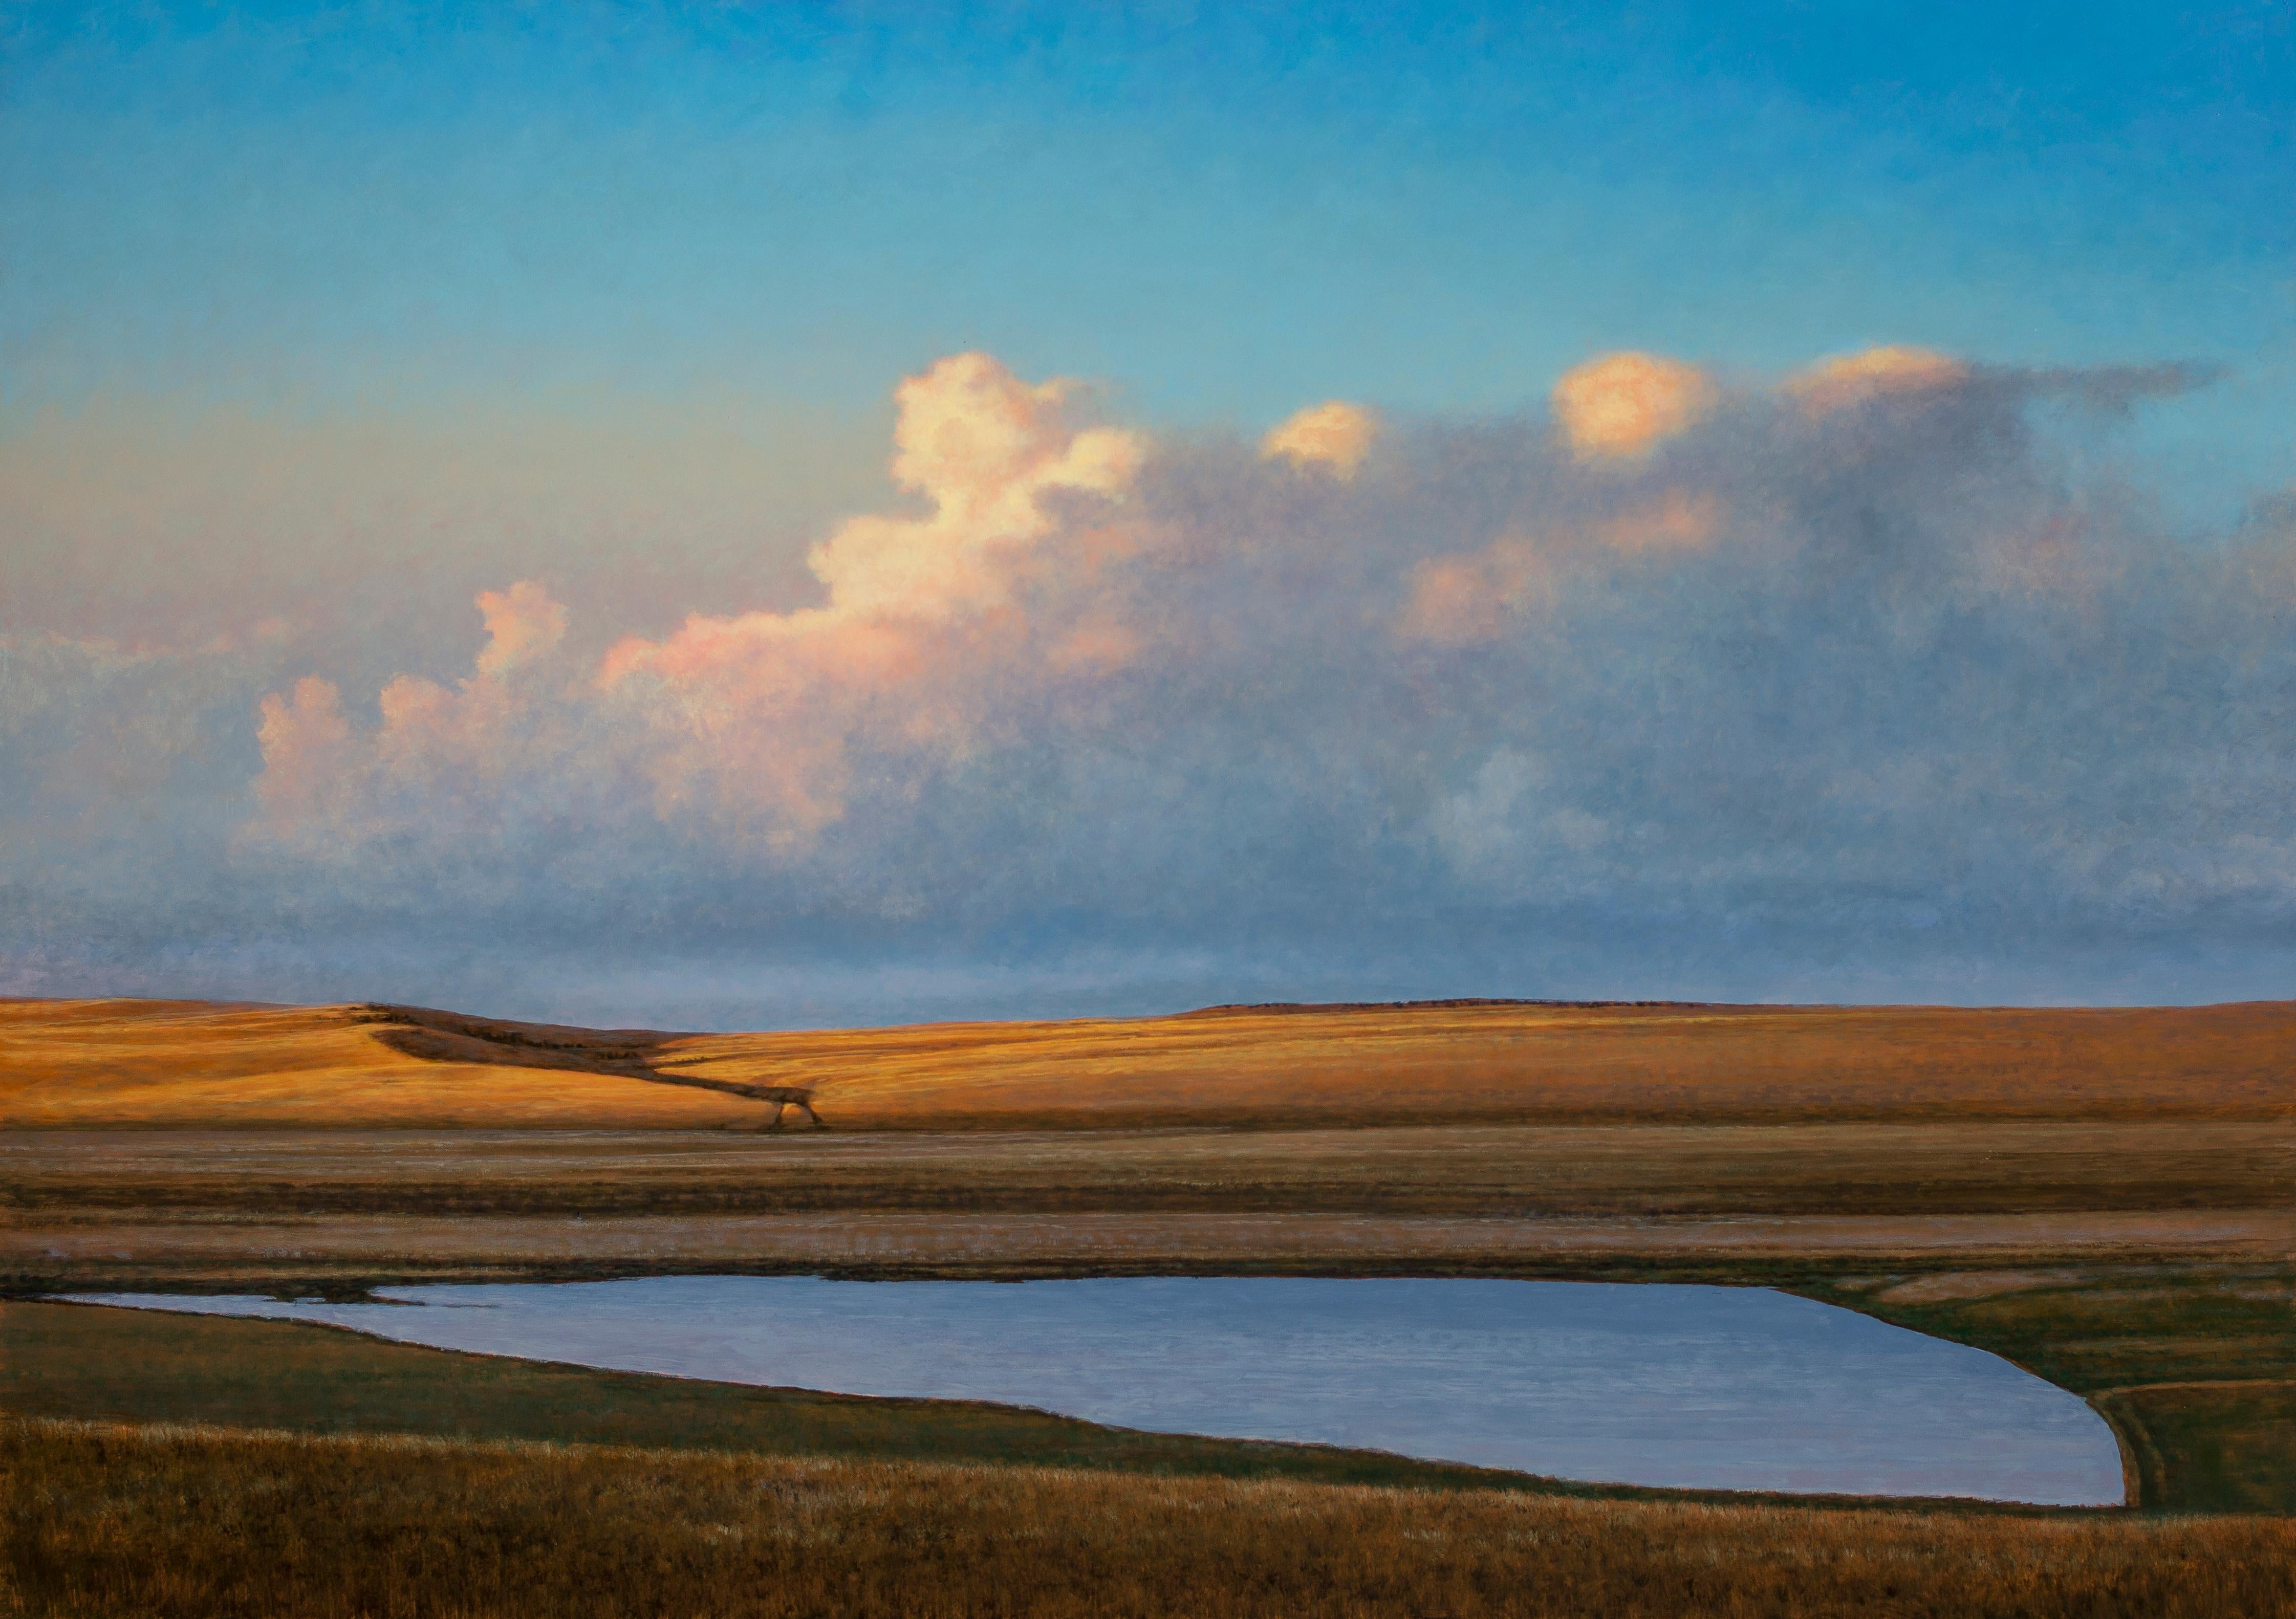 Cattle Pond Near Fairplay, CO - Serene Landscape Sun Kissed Clouds and Pond